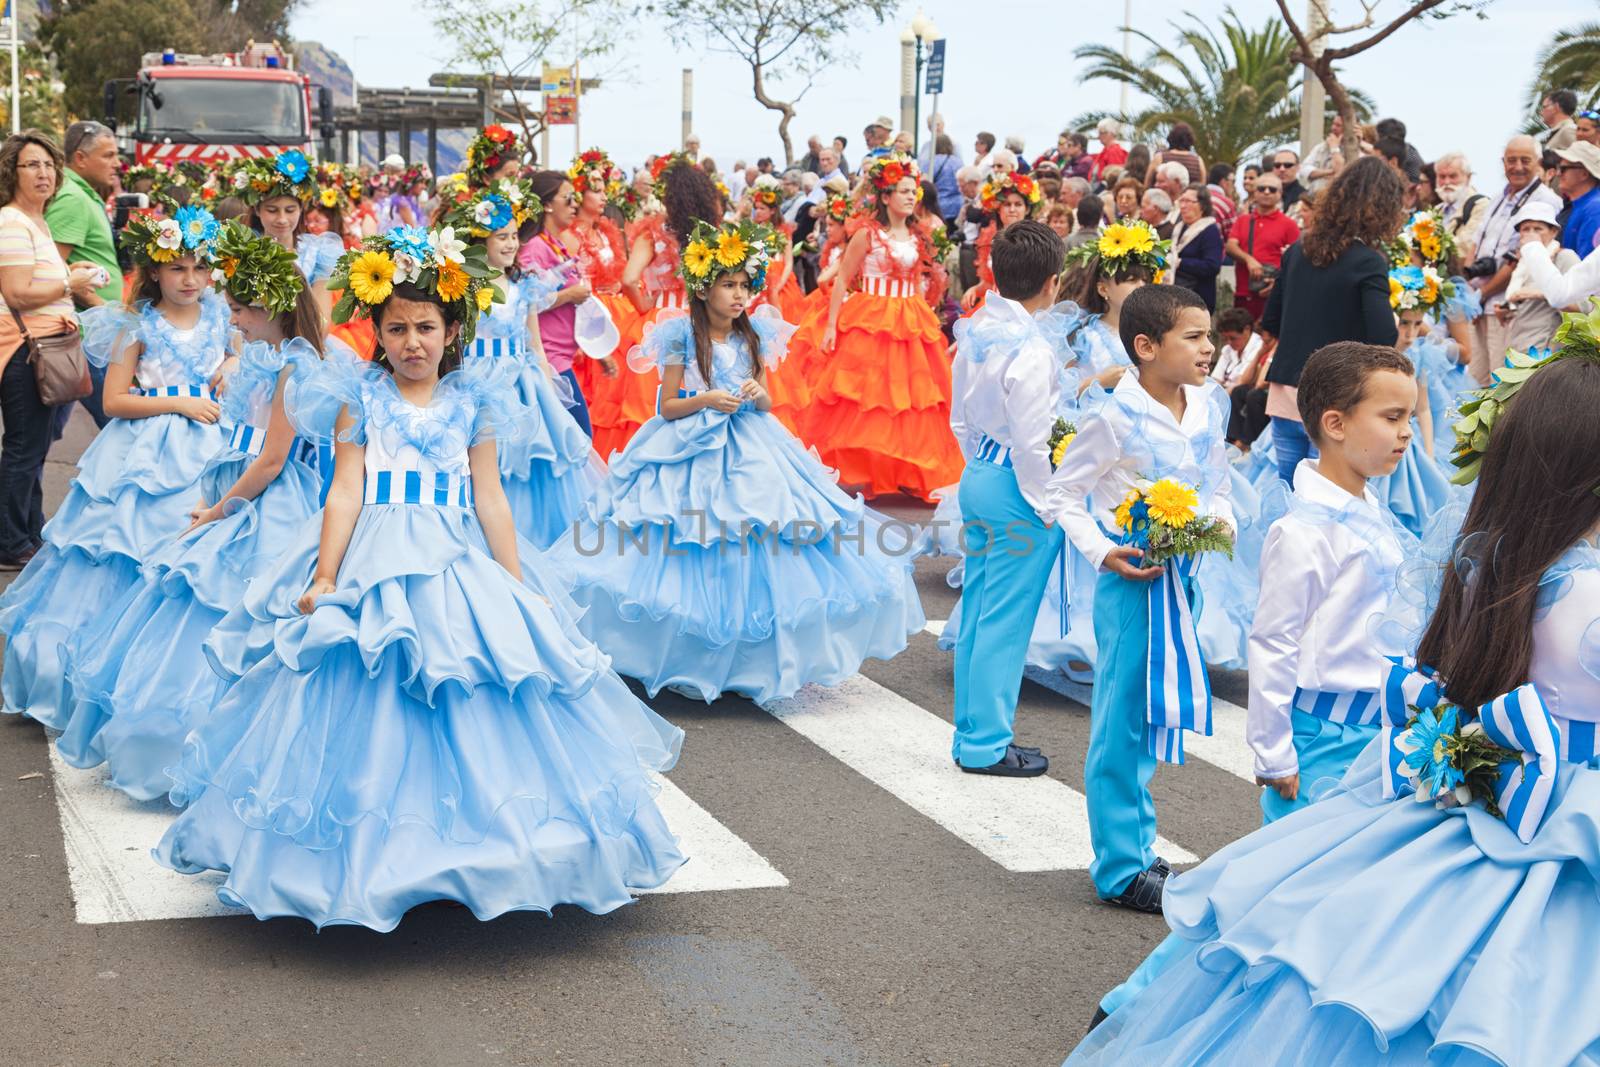 Performers with colorful and elaborate costumes taking part in the Parade of Flower Festival on the Madeira Island, Portugal. by oleandra